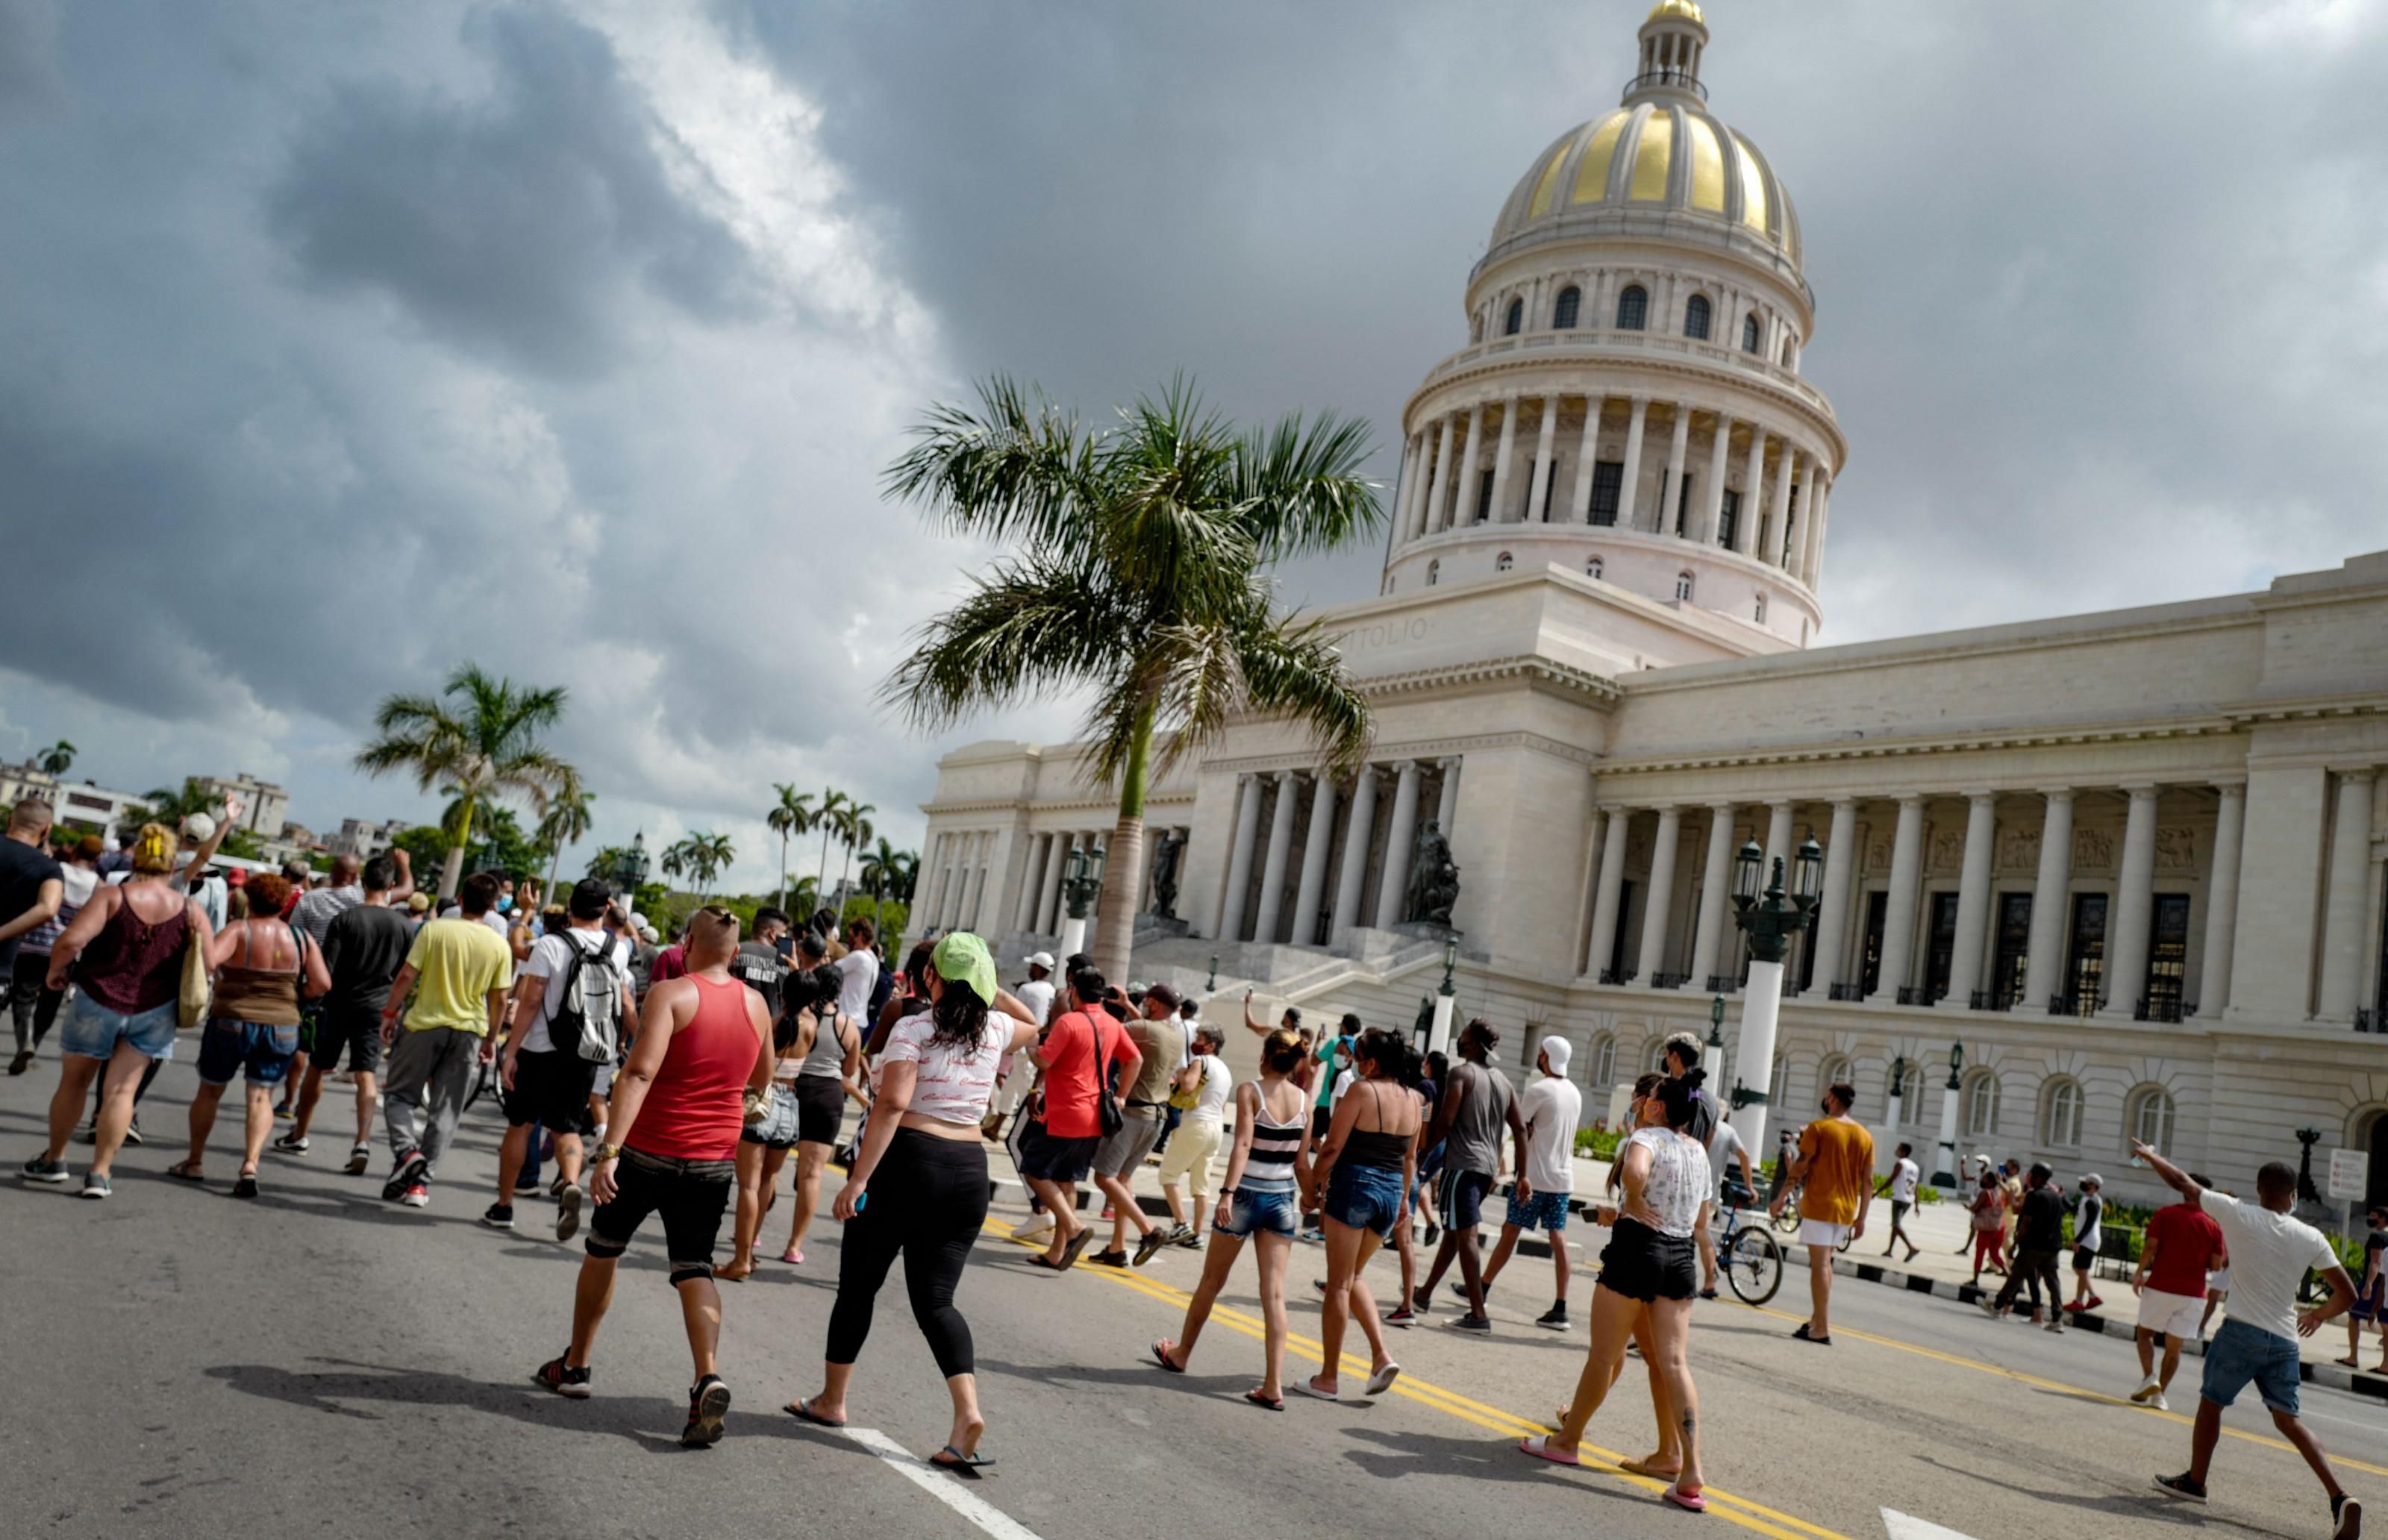 Cubans march in front of the nation's Capitol during a demonstration against the government of Cuban President Miguel Diaz-Canel in Havana, on July 11, 2021. (Photo: Adalberto Roque/AFP via Getty Images)